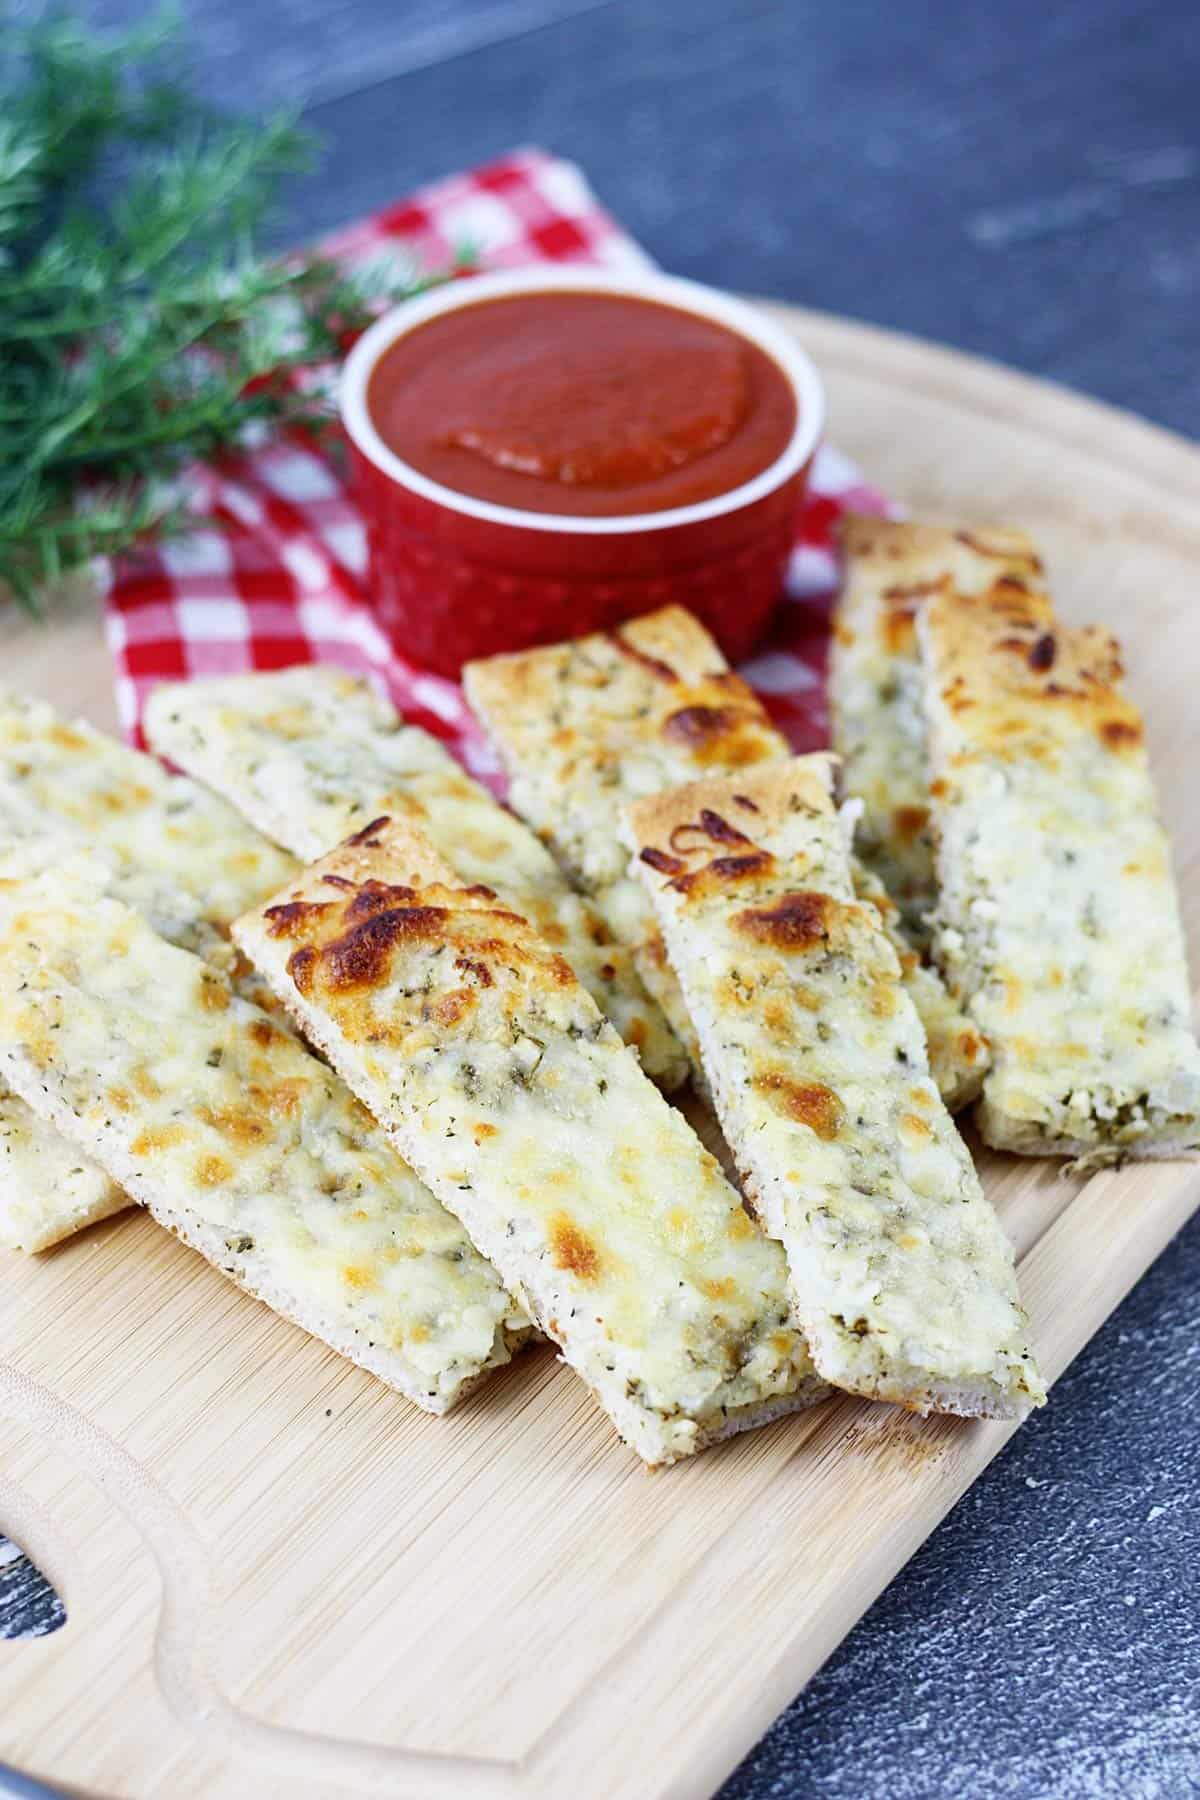 Pizza sticks on a cutting board with pizza sauce.